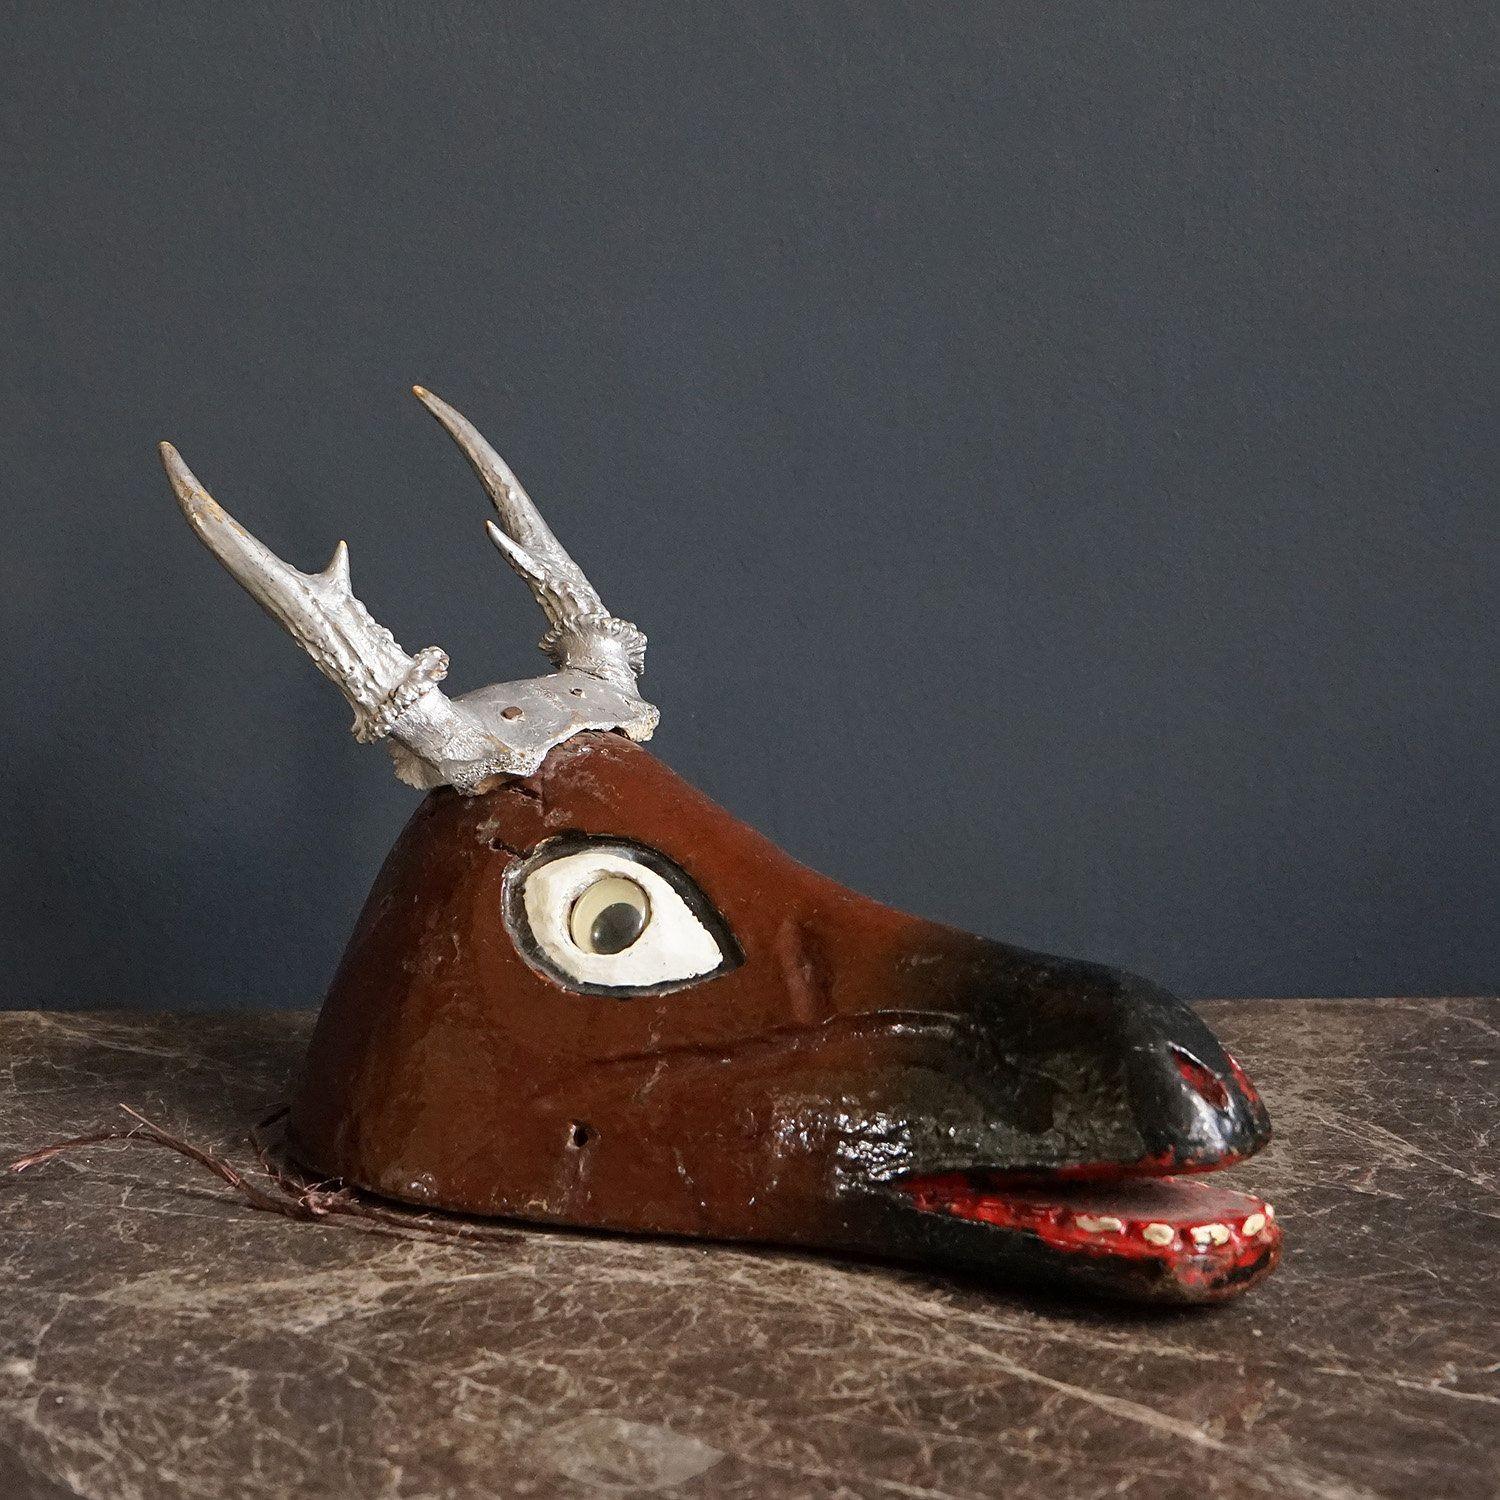 Vintage Wooden Deer Head With Antlers

Hand-carved and polychrome painted with silver antlers, googly eyes and a wonderful smile.

Provenance: Previously with Christies from the collection of Hollywood actress Brooke Haywood, along with her husband